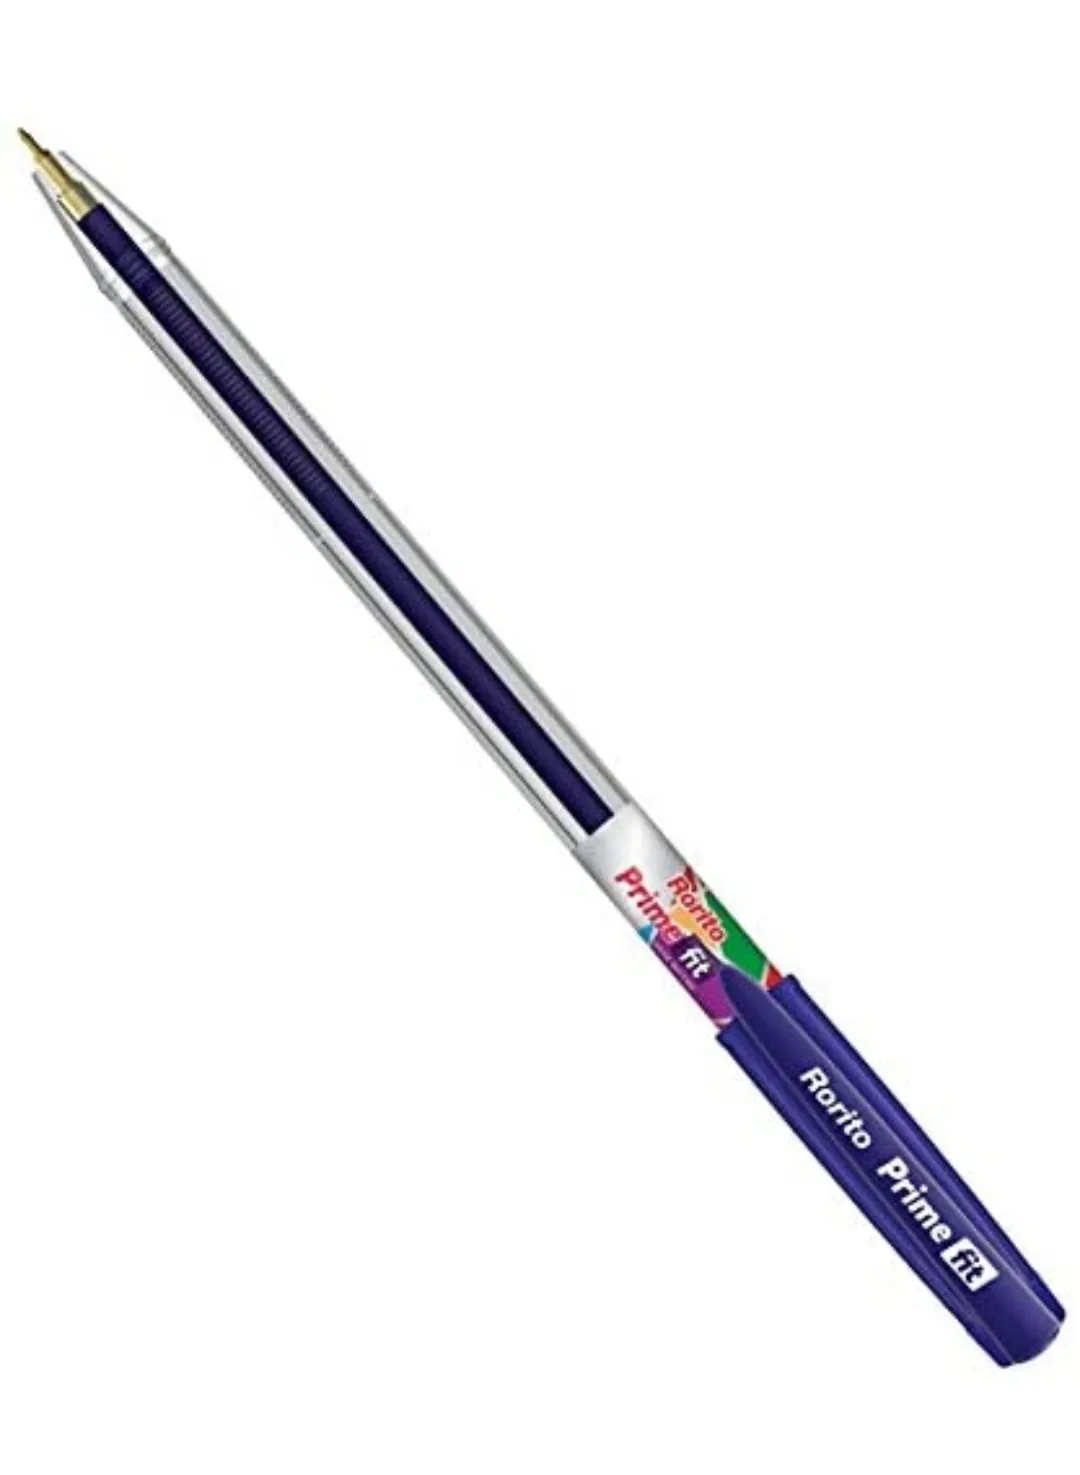 Rorito Prime Fit Ball Pen (Blue) - Pack of 5